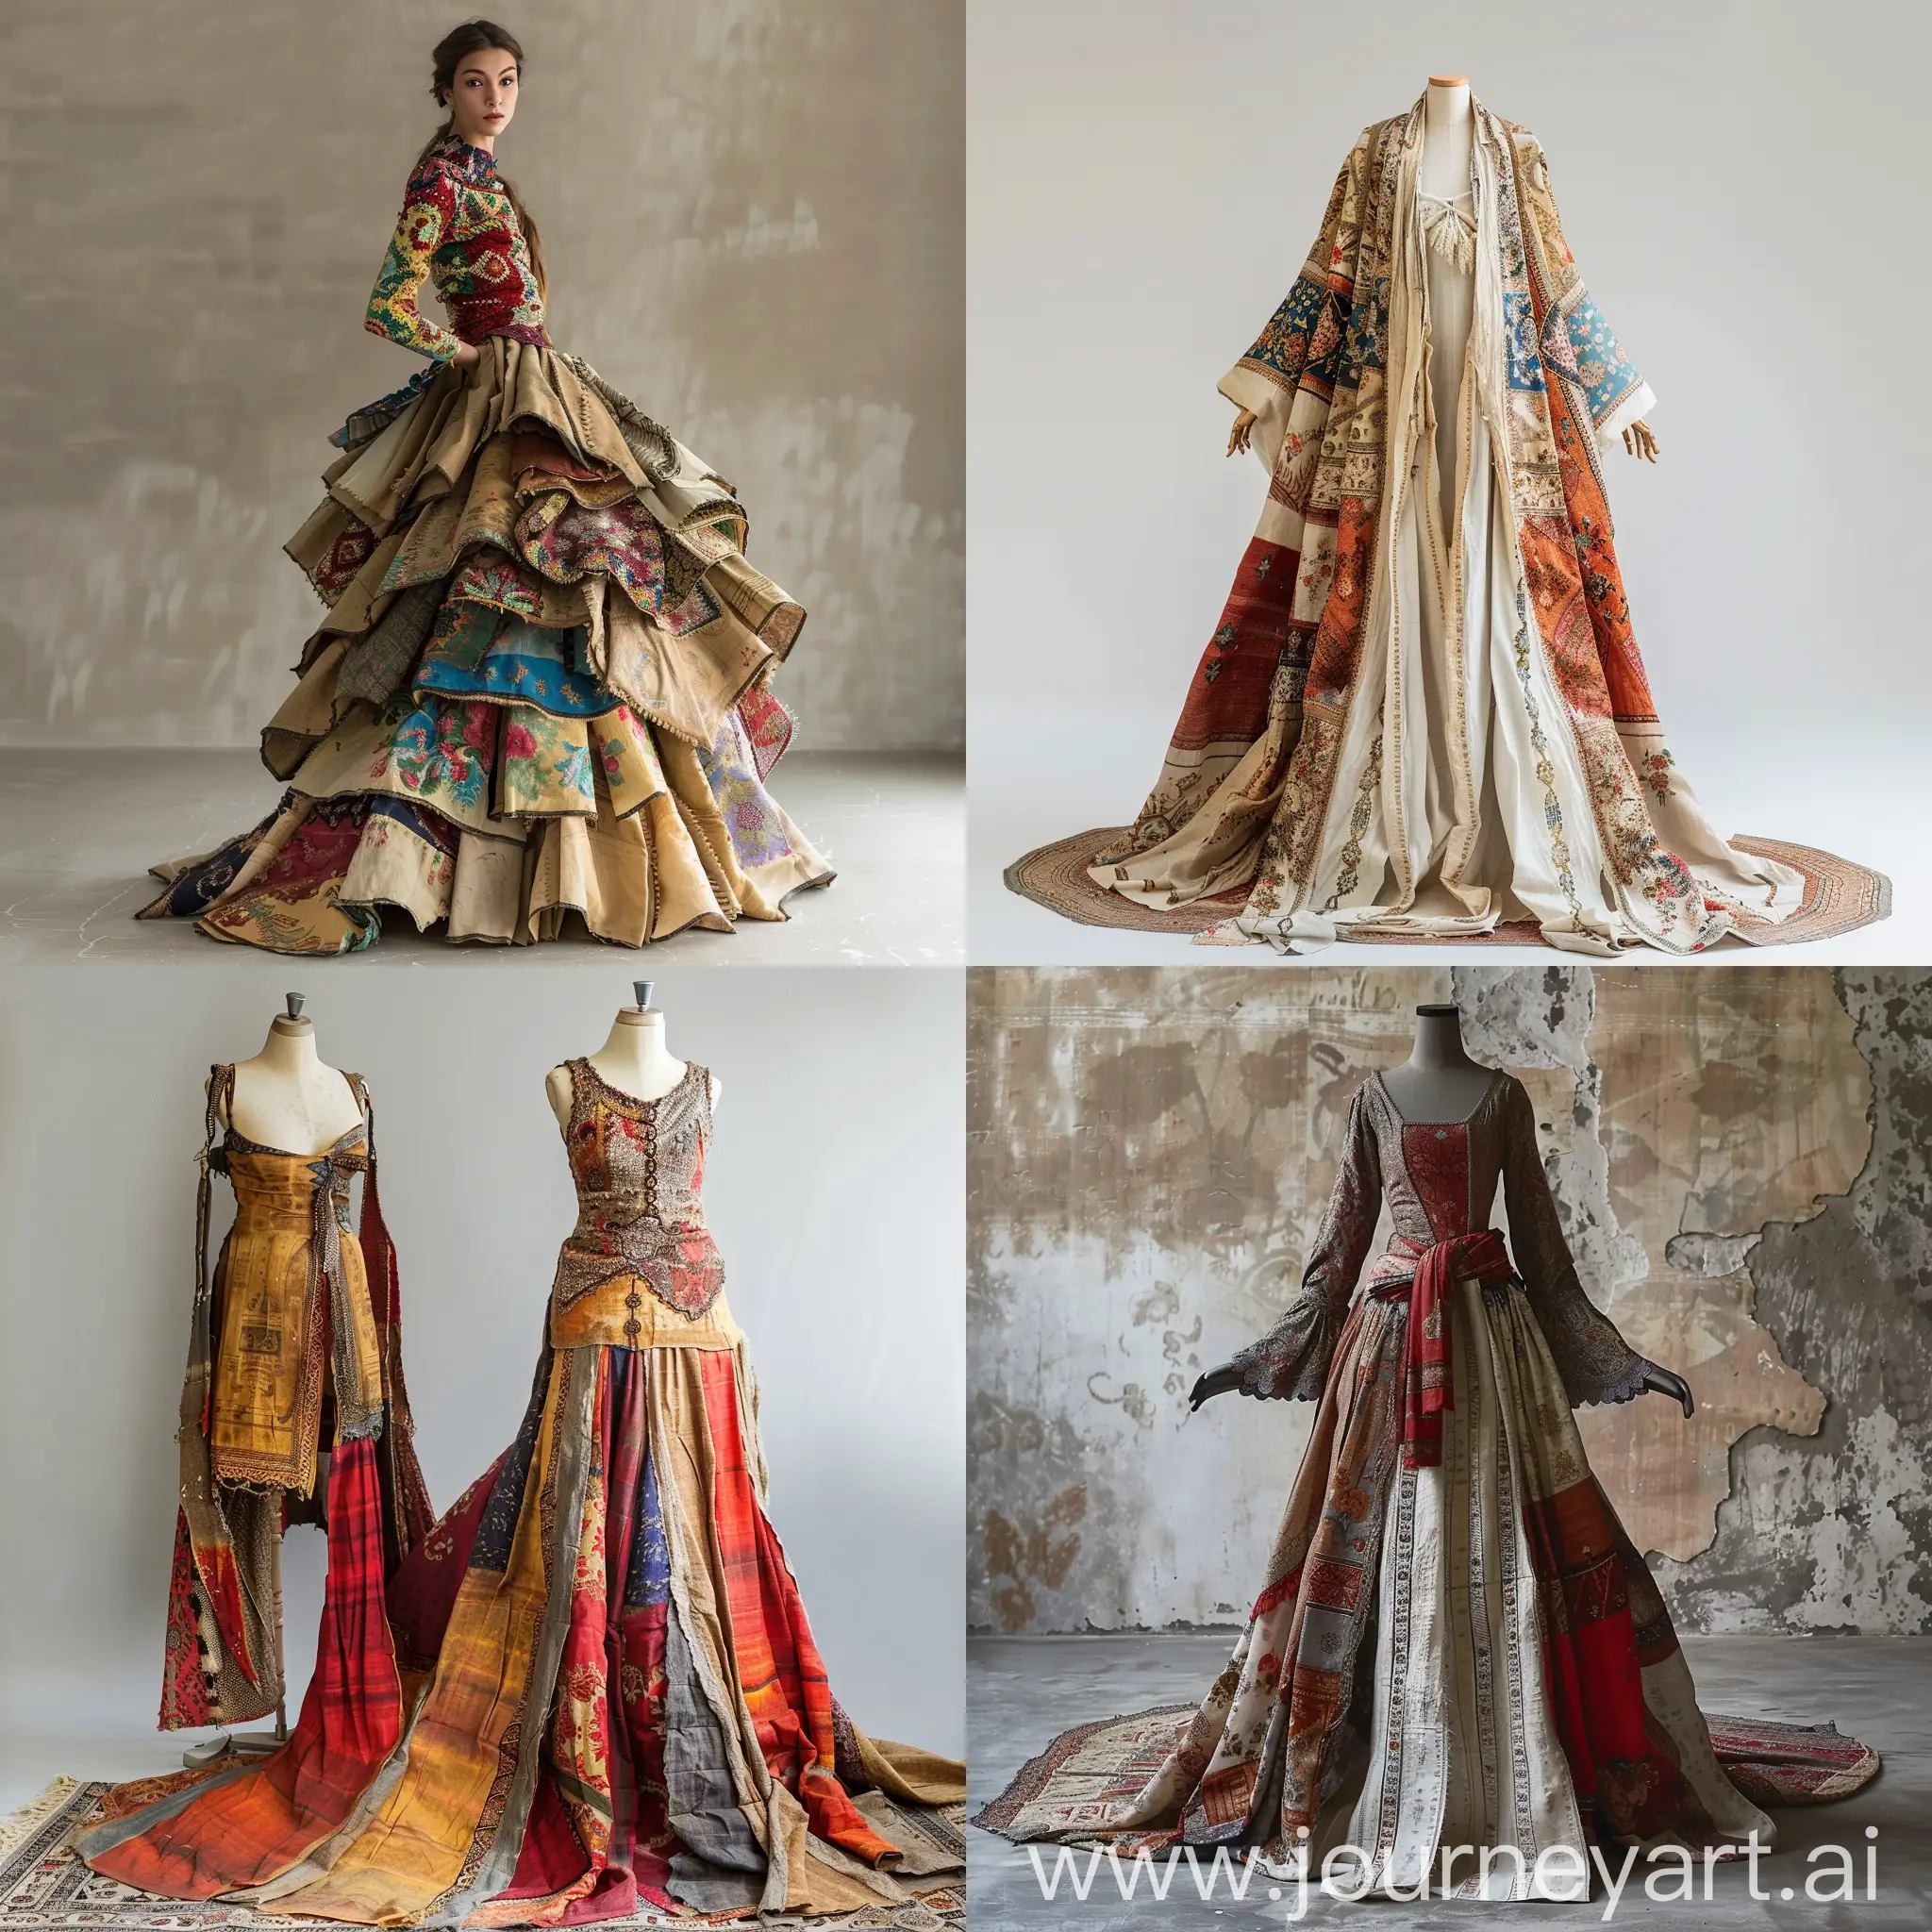 Creative-Dress-Design-with-Authentic-Persian-Rice-Sacks